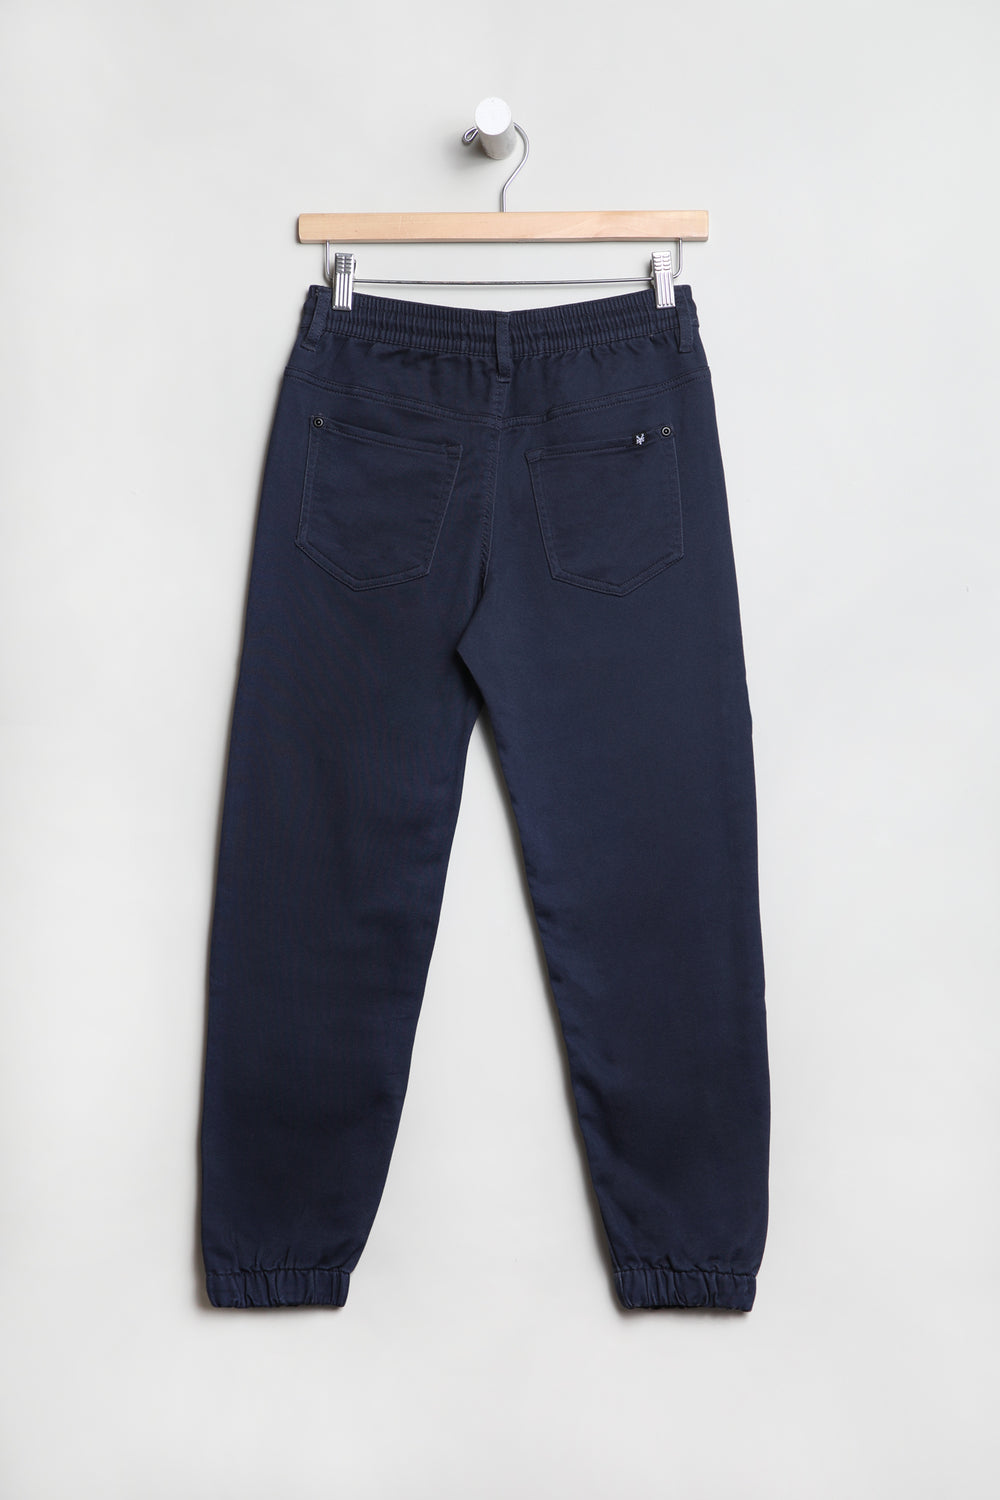 Zoo York Youth Relaxed Soft Denim Jogger Navy